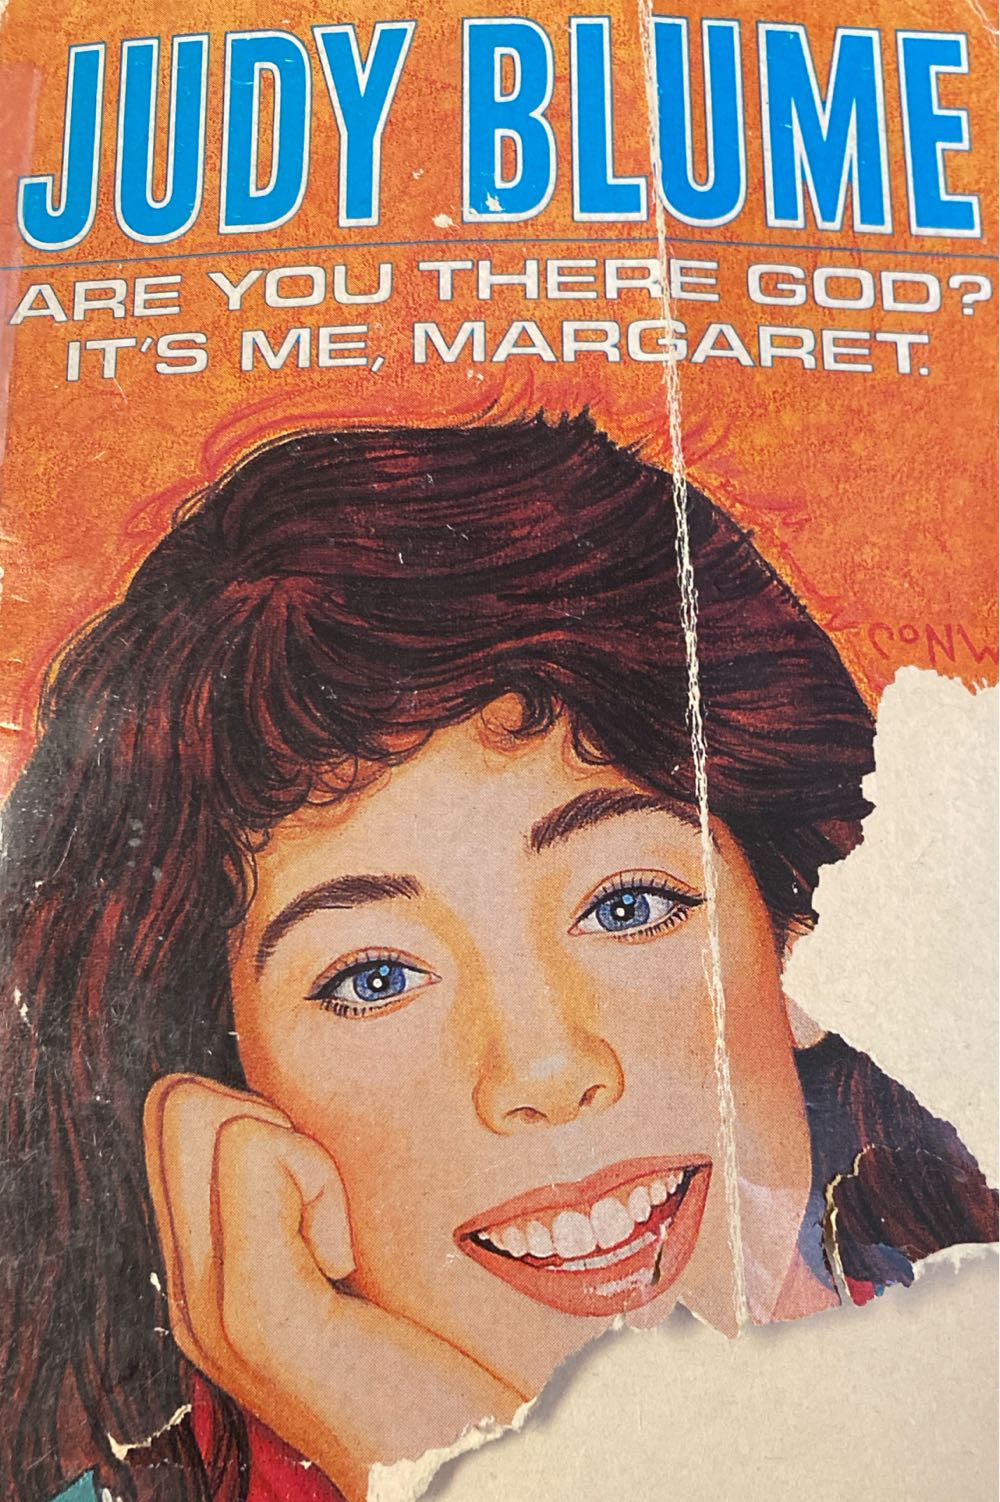 Are You There God? It’s Me, Margaret - Judy Blume (Dell Books for Young Readers) book collectible [Barcode 9780440900474] - Main Image 1